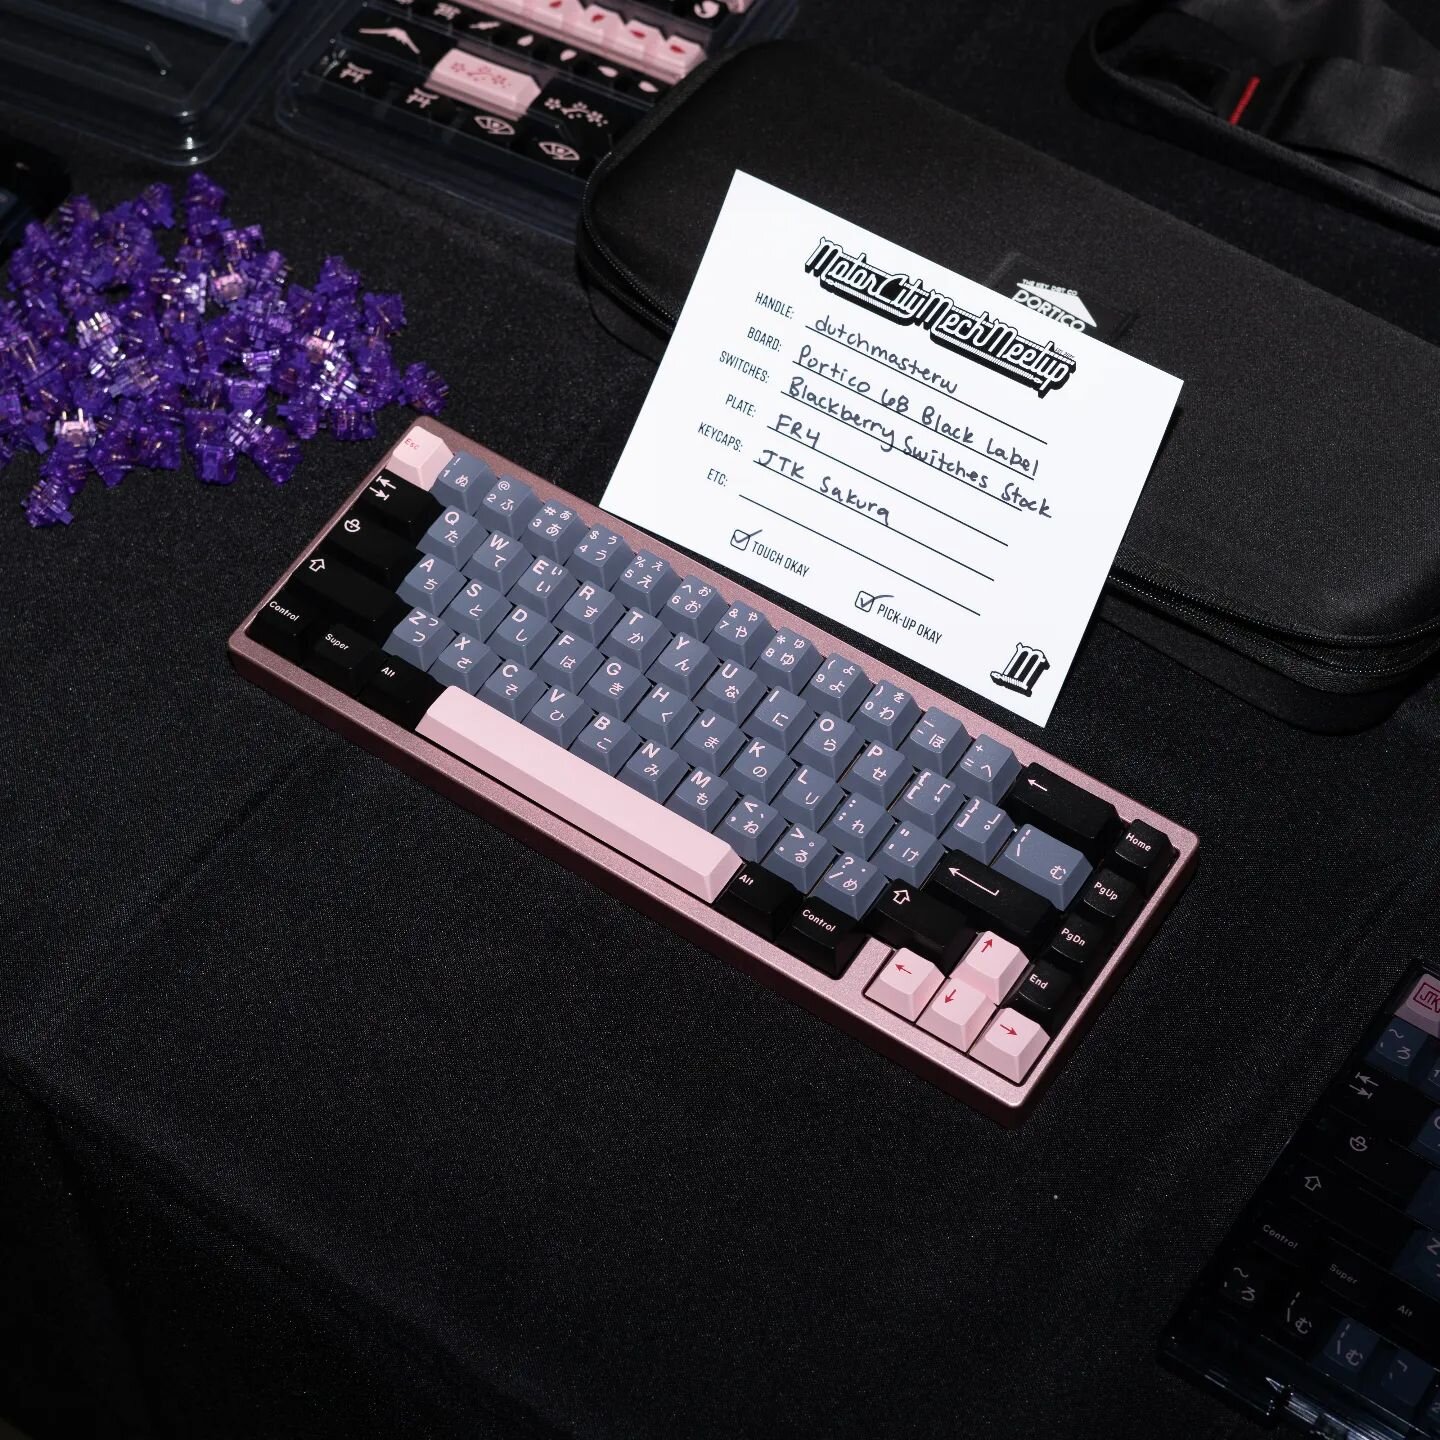 🌸 From another one of our special guests, @dutchmasterw showed off this very clean @thekey.company portico black label with JTK sakura.

Go give Dutch a follow!!

📸@captain.sterling 

.
.
.
.
.
.
.
.
#motorcitymechmeetup2022 #notorcity #keyboard #k